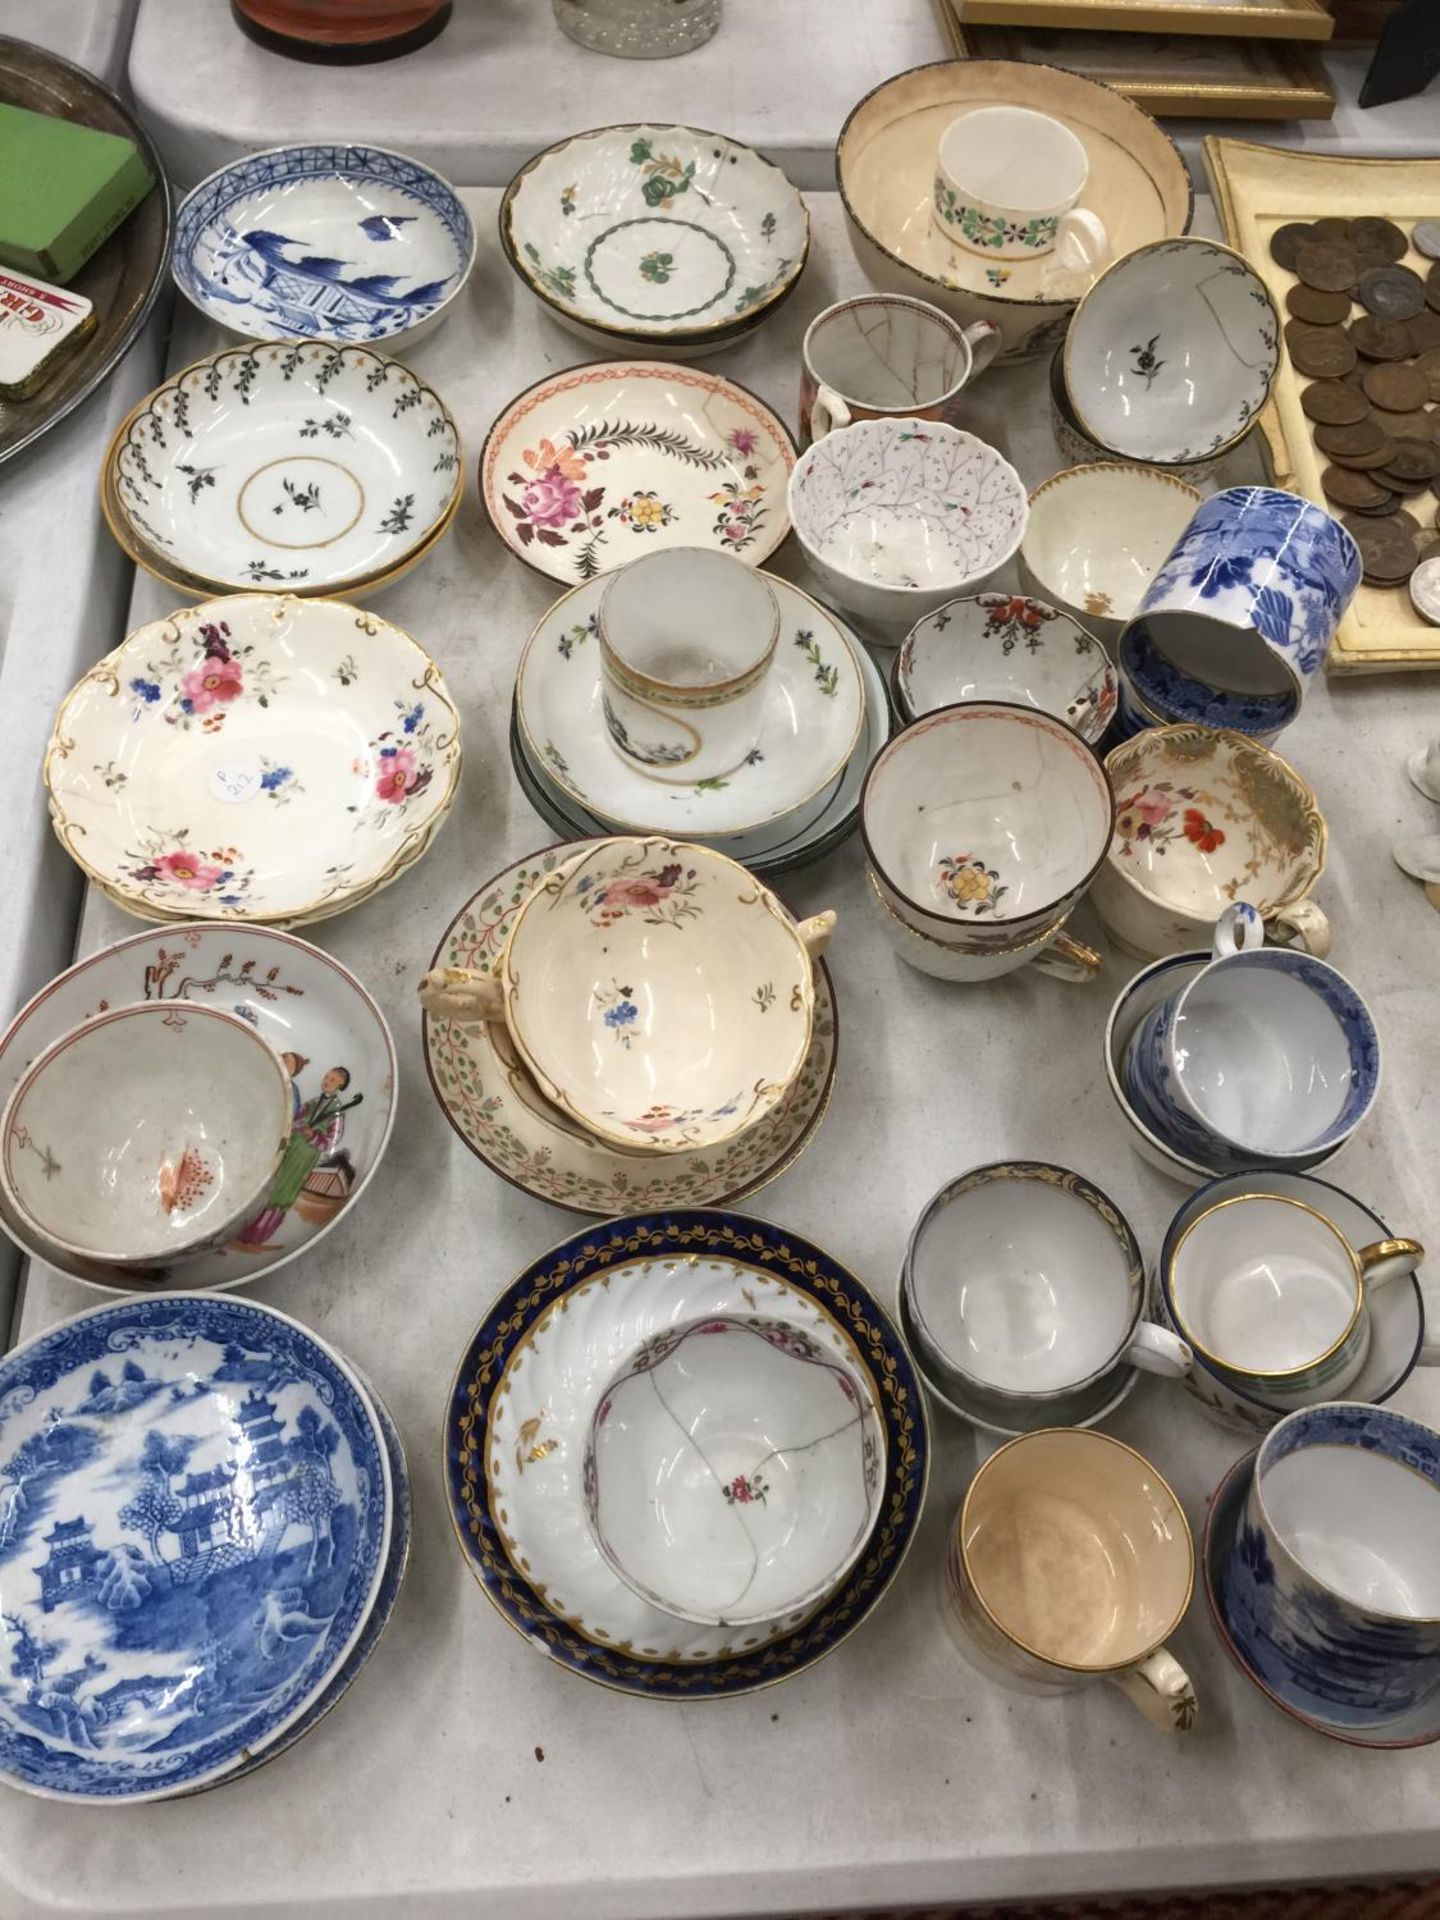 A LARGE QUANTITY OF EARLY 19TH CENTURY TEABOWLS, CUPS AND SAUCERS - SOME A/F